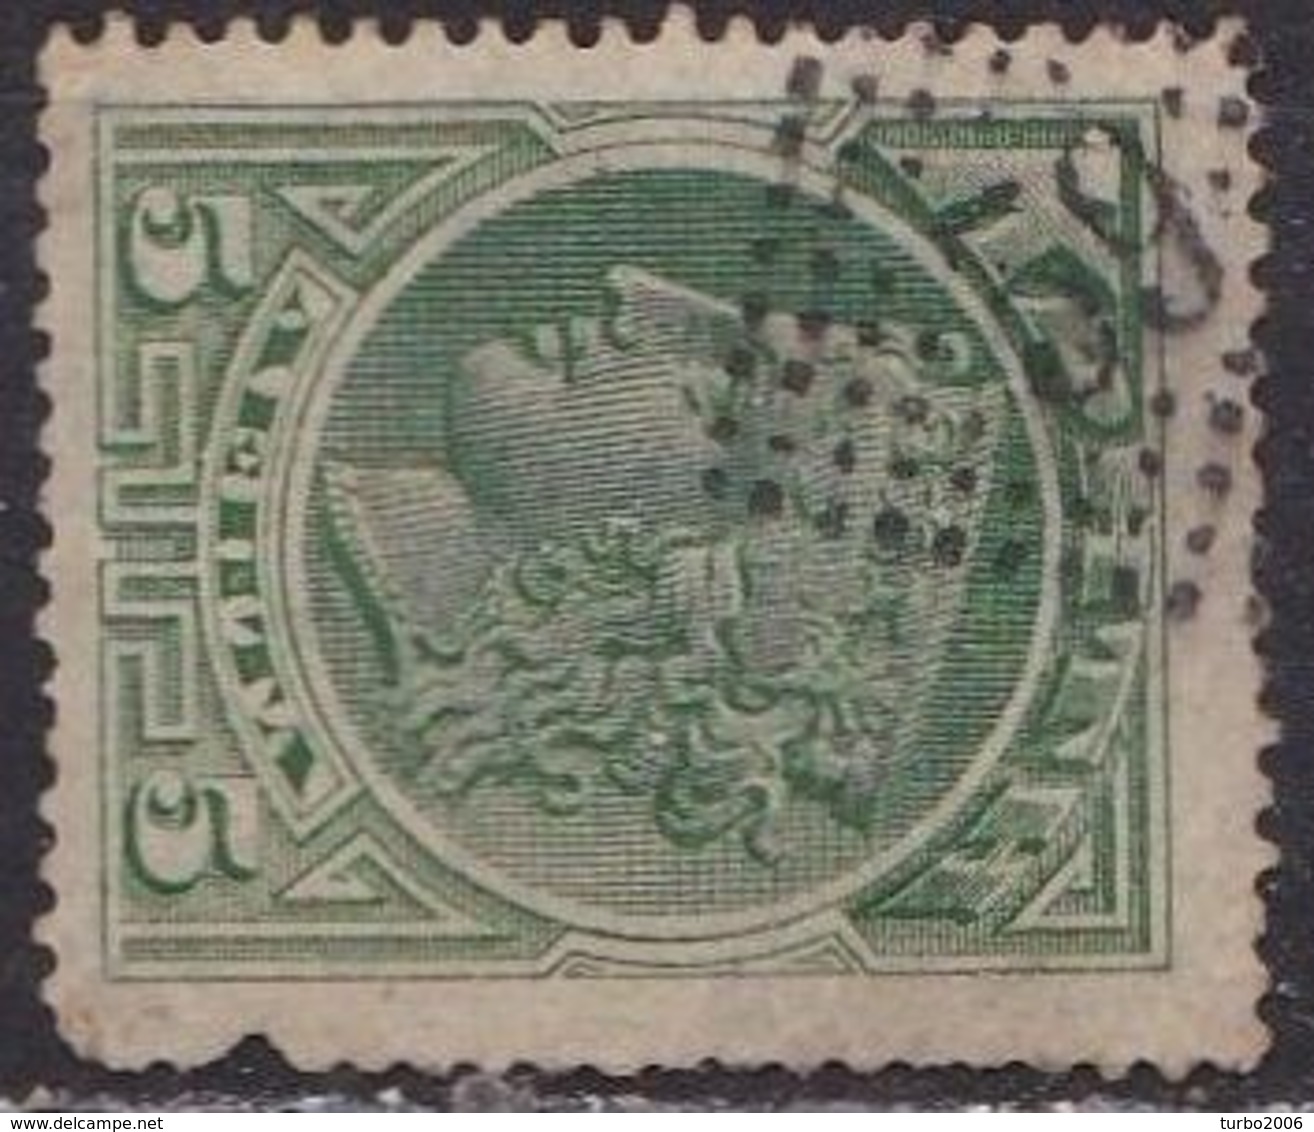 CRETE 1900 1st Issue Of The Cretan State 5 L. Green Vl. 2 With Dotted Rural Cancellation 59 (ΒΙΑΝΝΟΣ) - Kreta